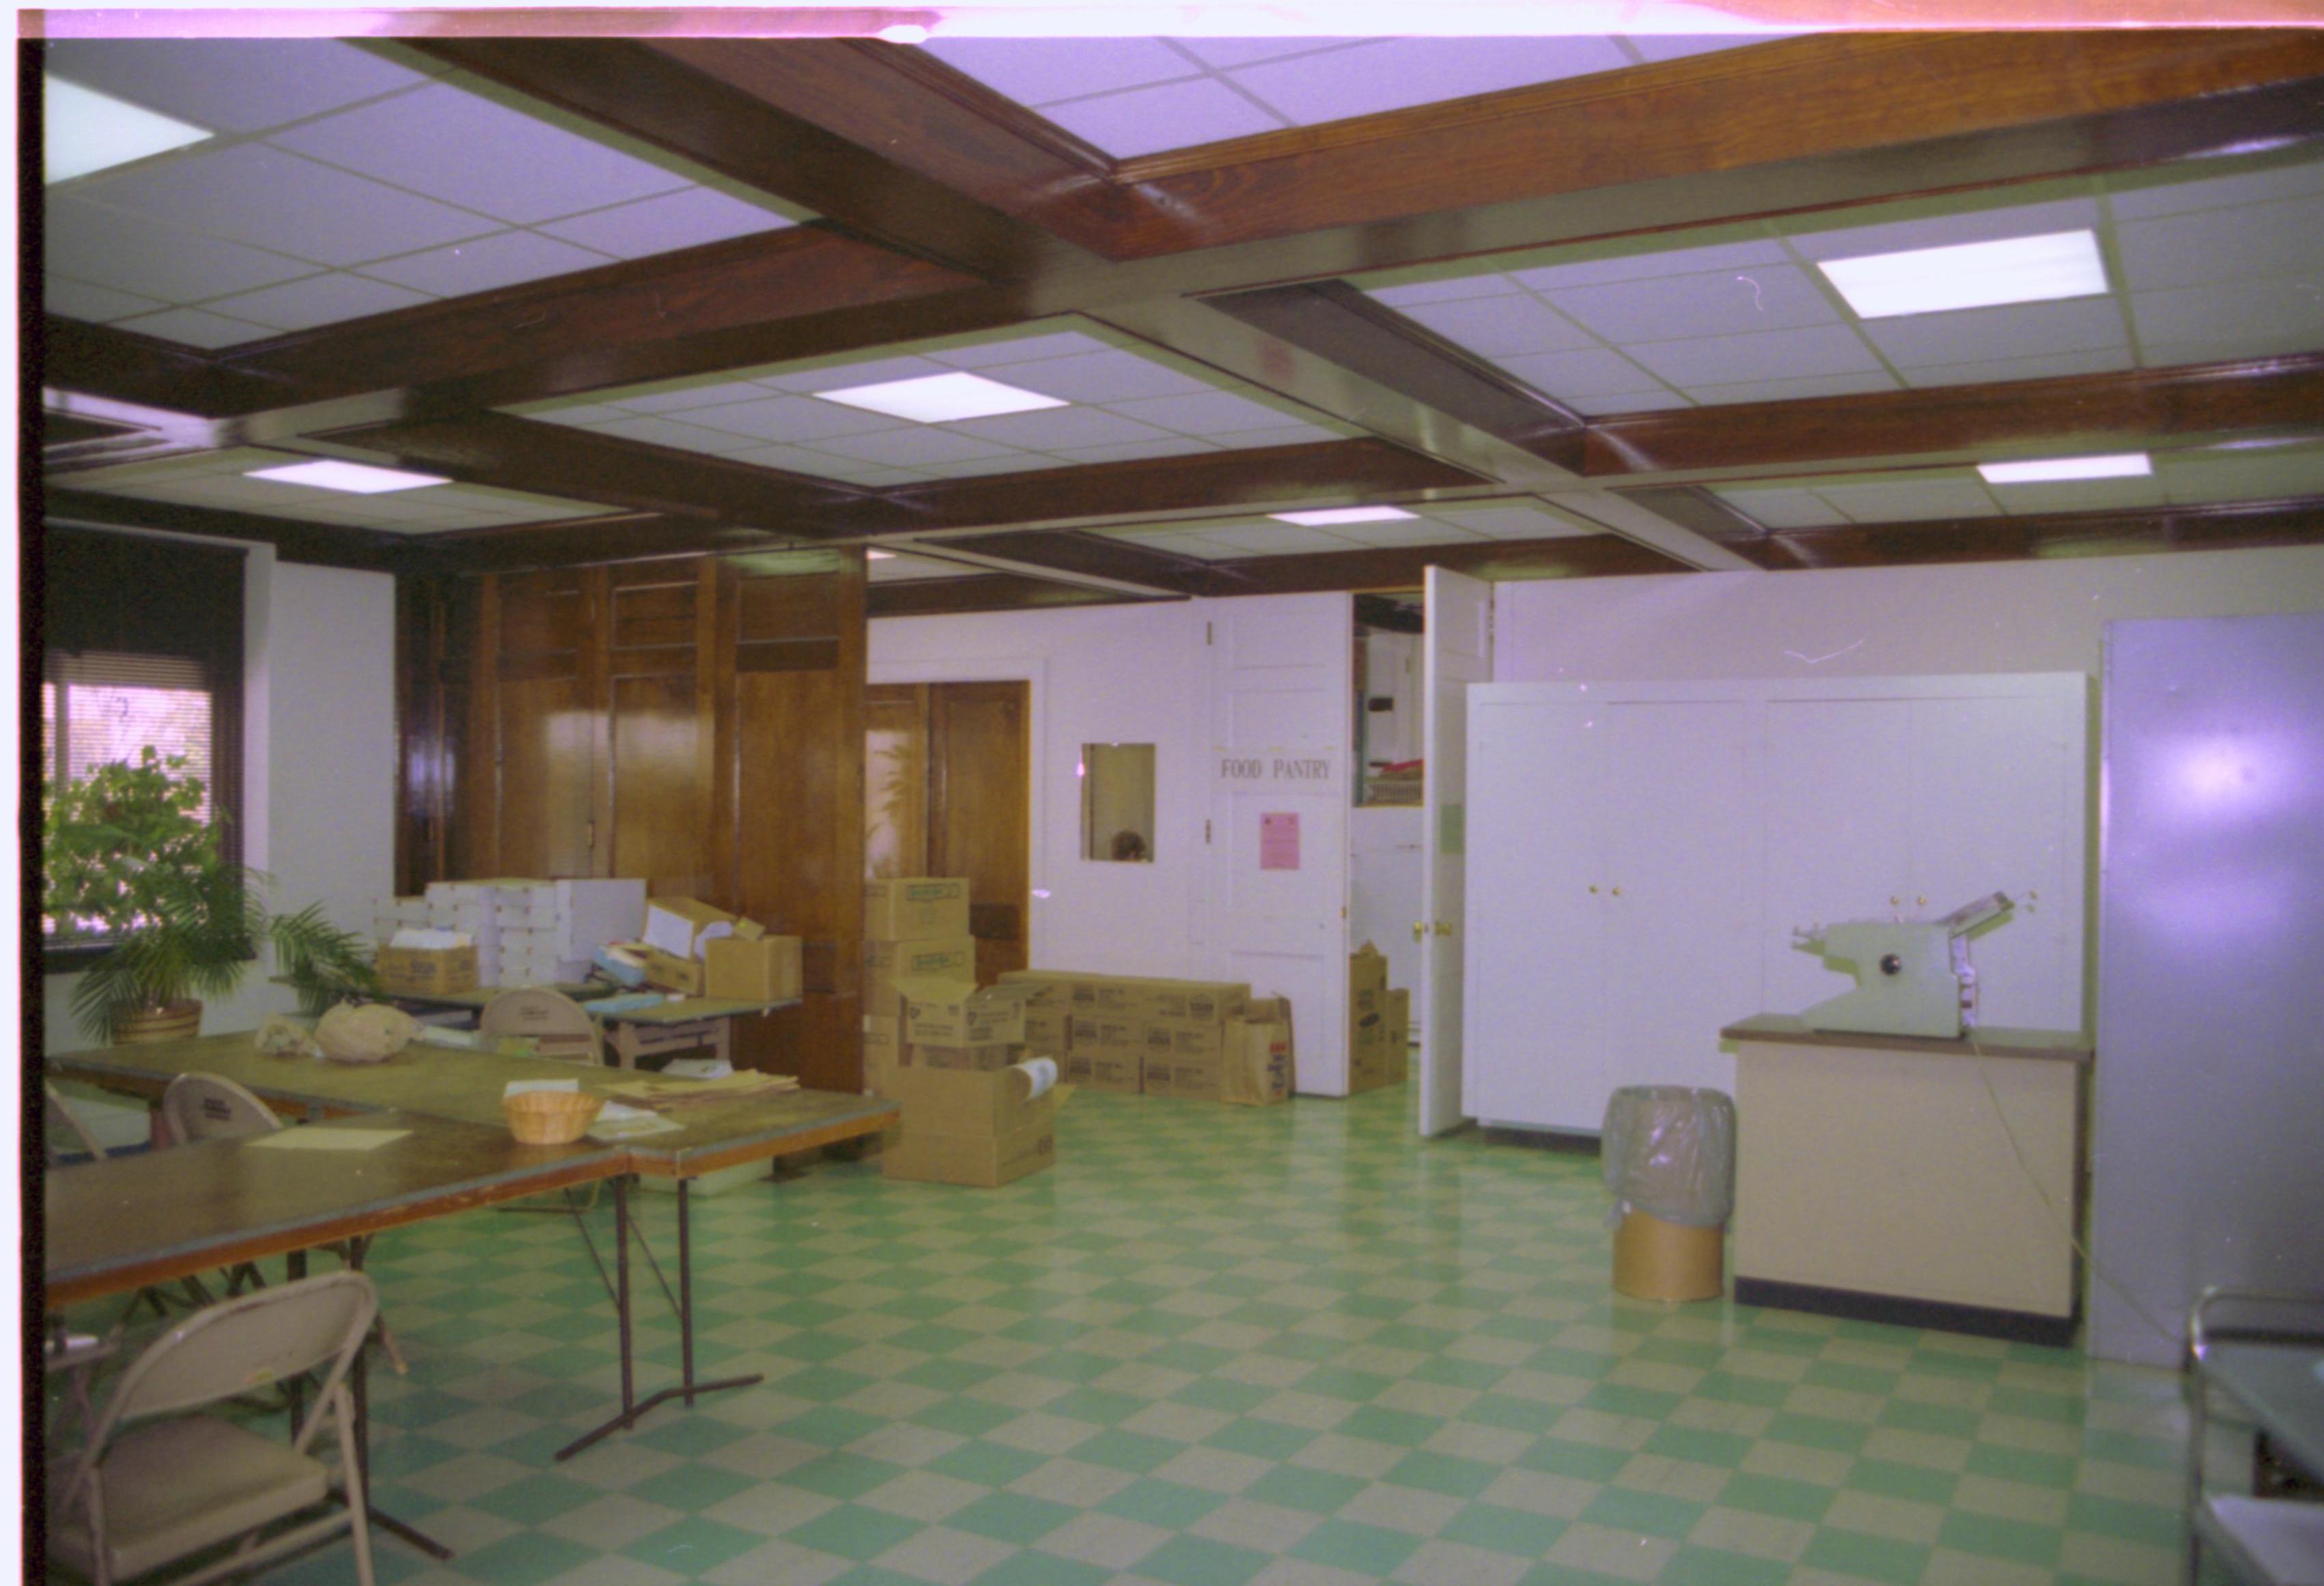 Large work room with tables and boxes. Grace Lutheran Church